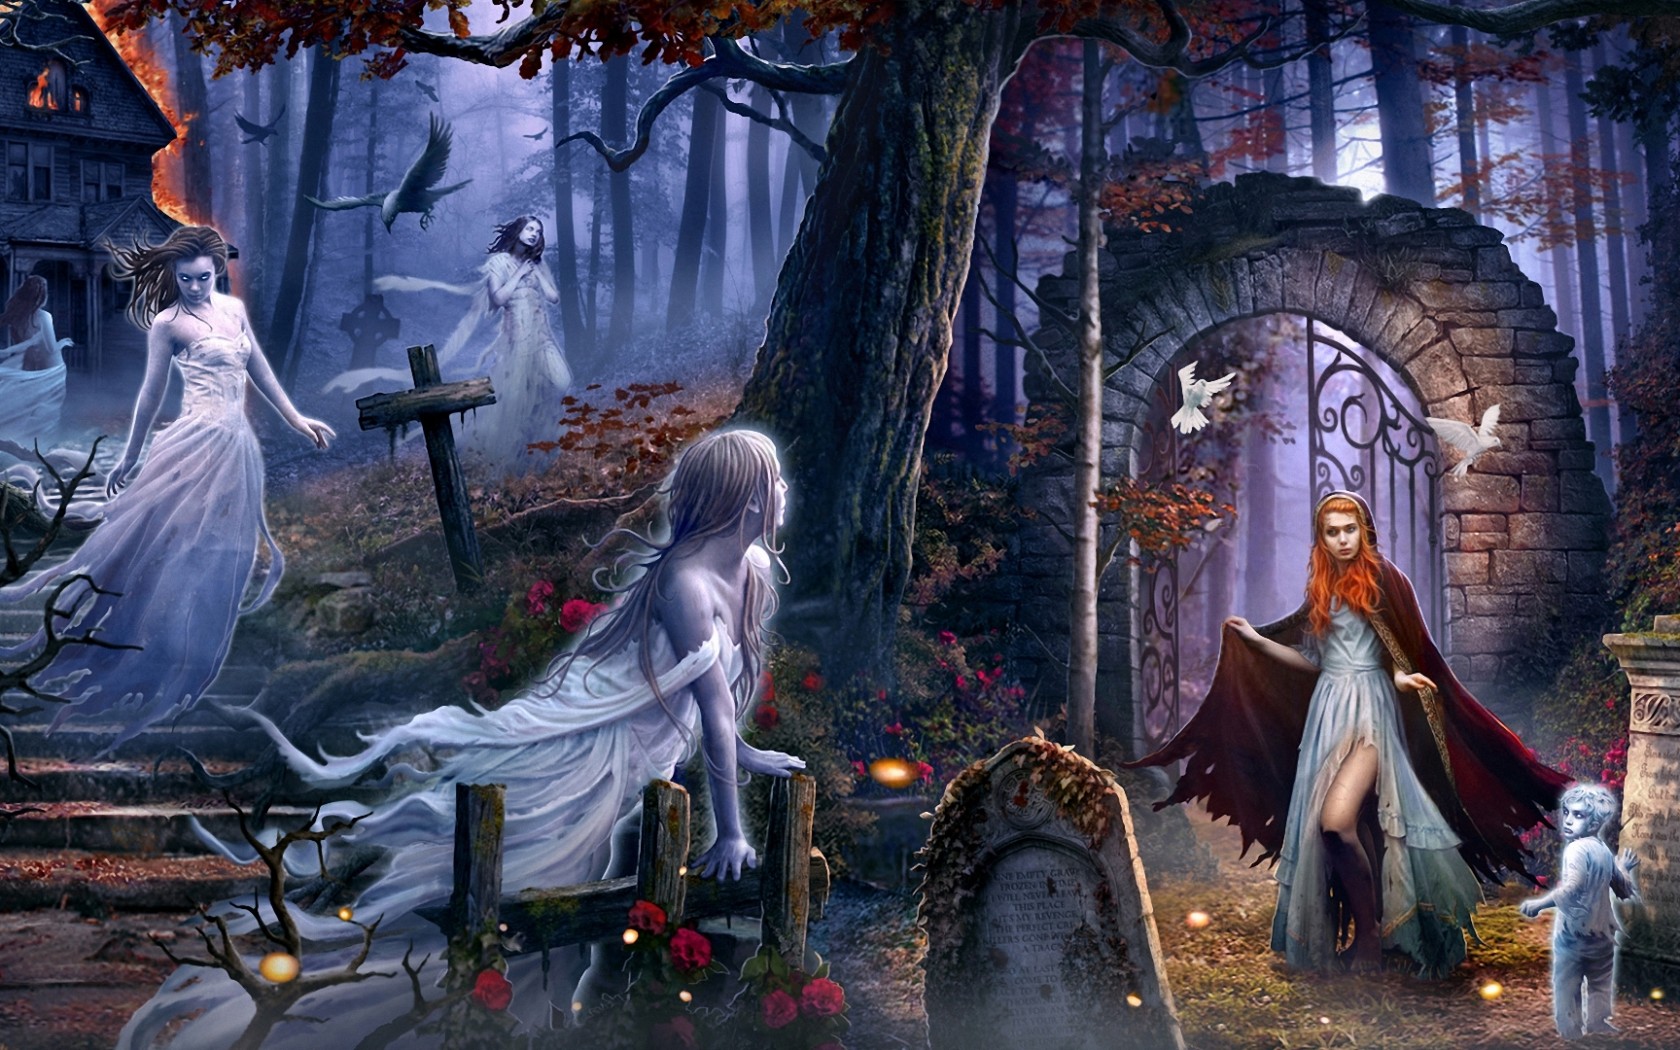 Child Ghosts in Graveyard Art - ID: 84182 - Art Abyss